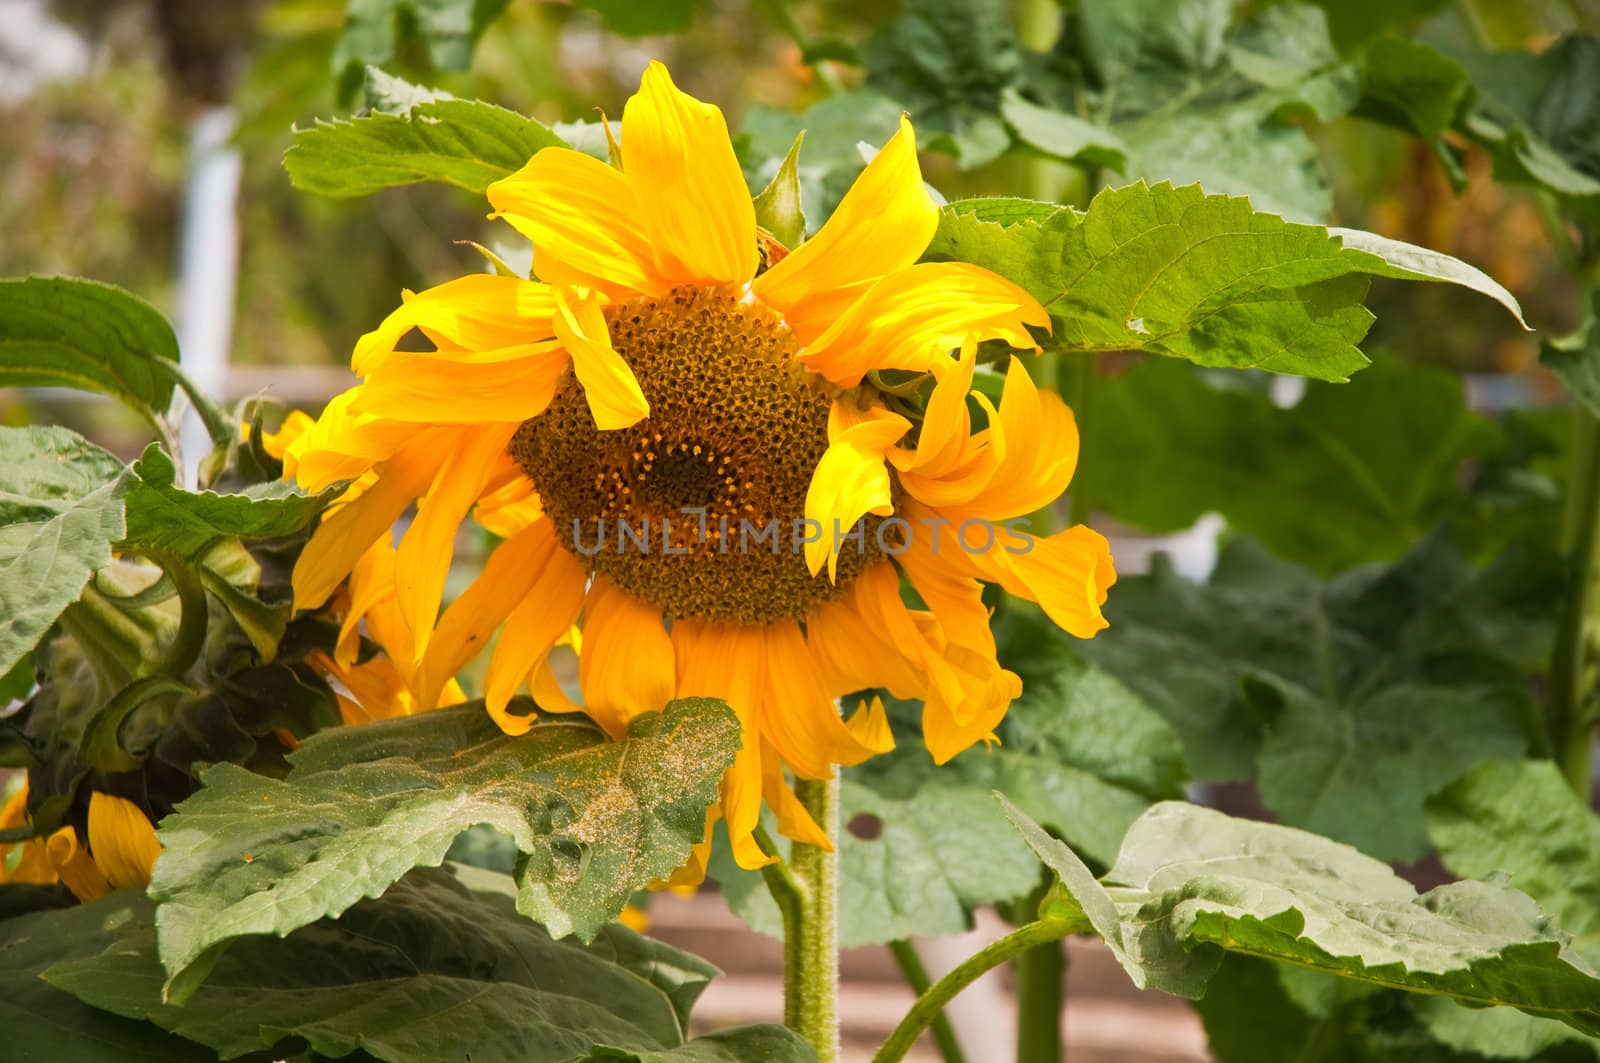 Beautiful sunflower with green leaves .